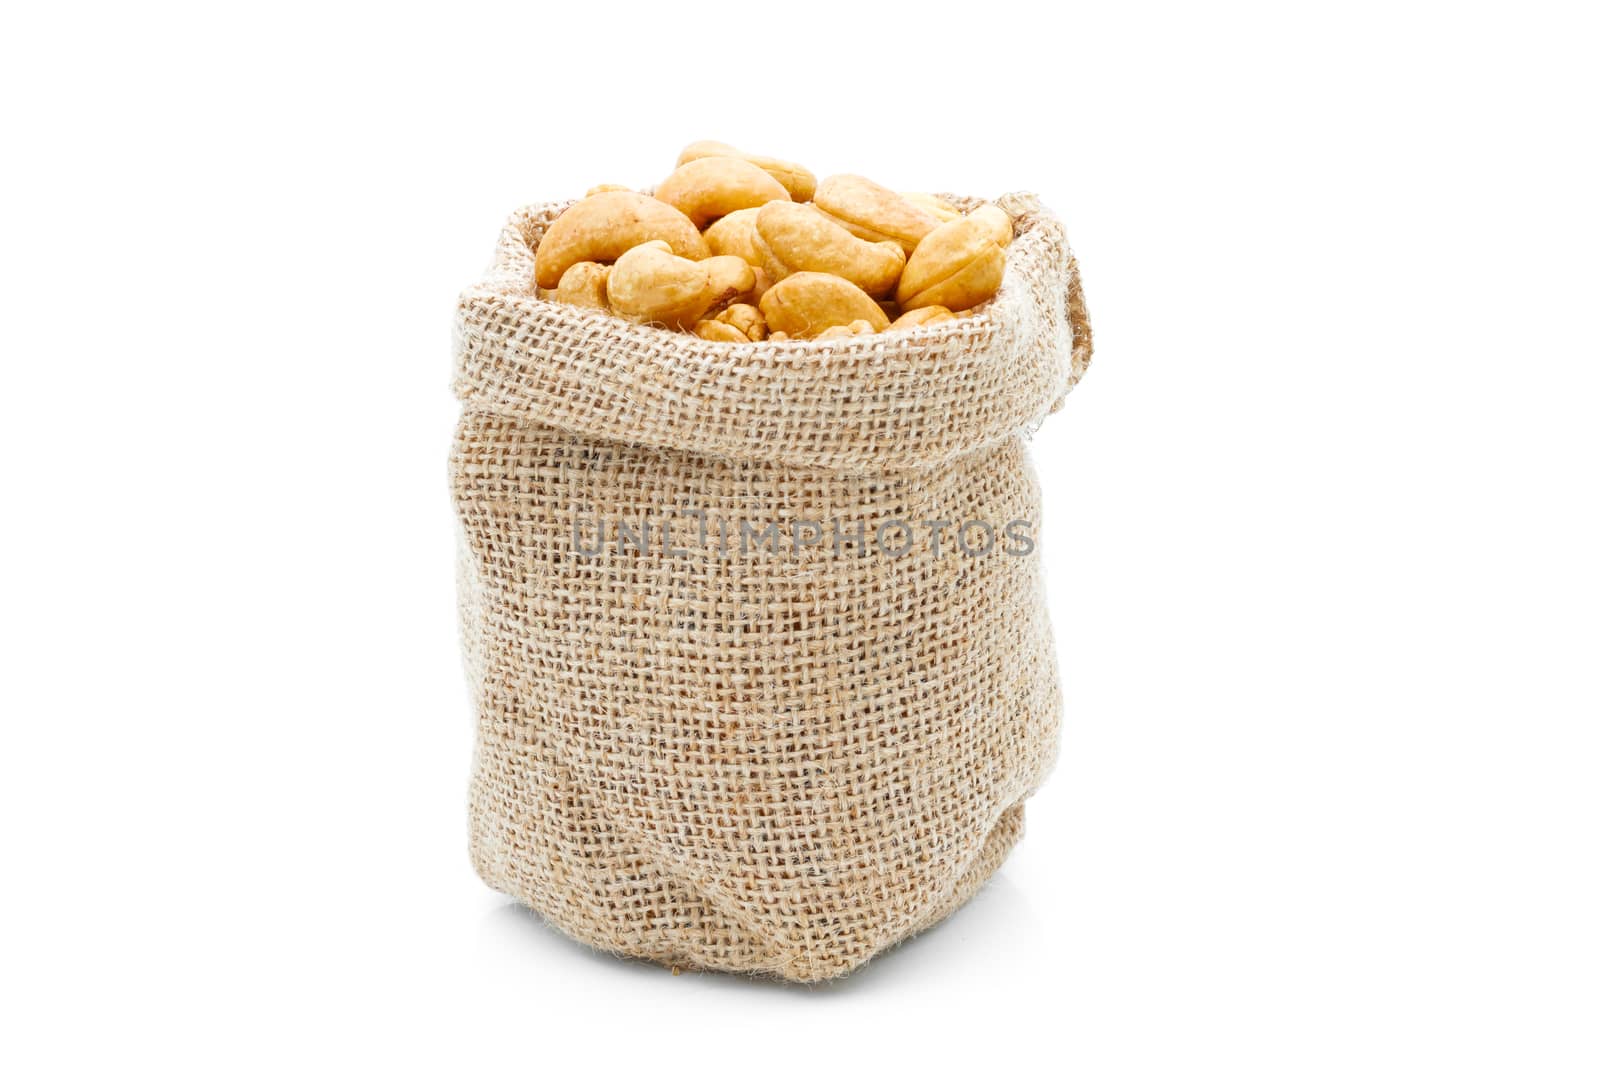 Cashews in a sack on a white background by sompongtom